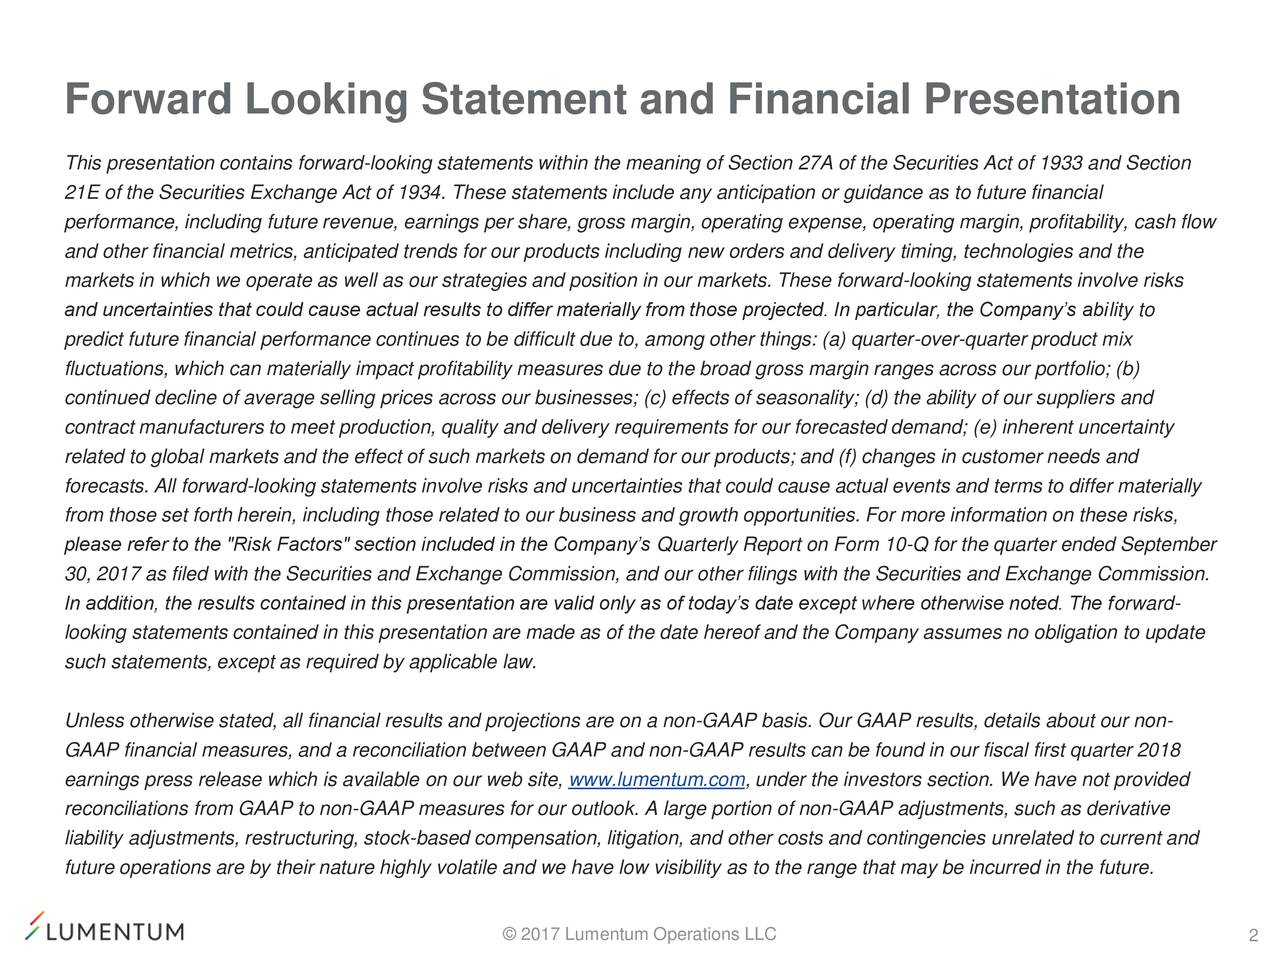 Forward Looking Statement and Financial Presentation